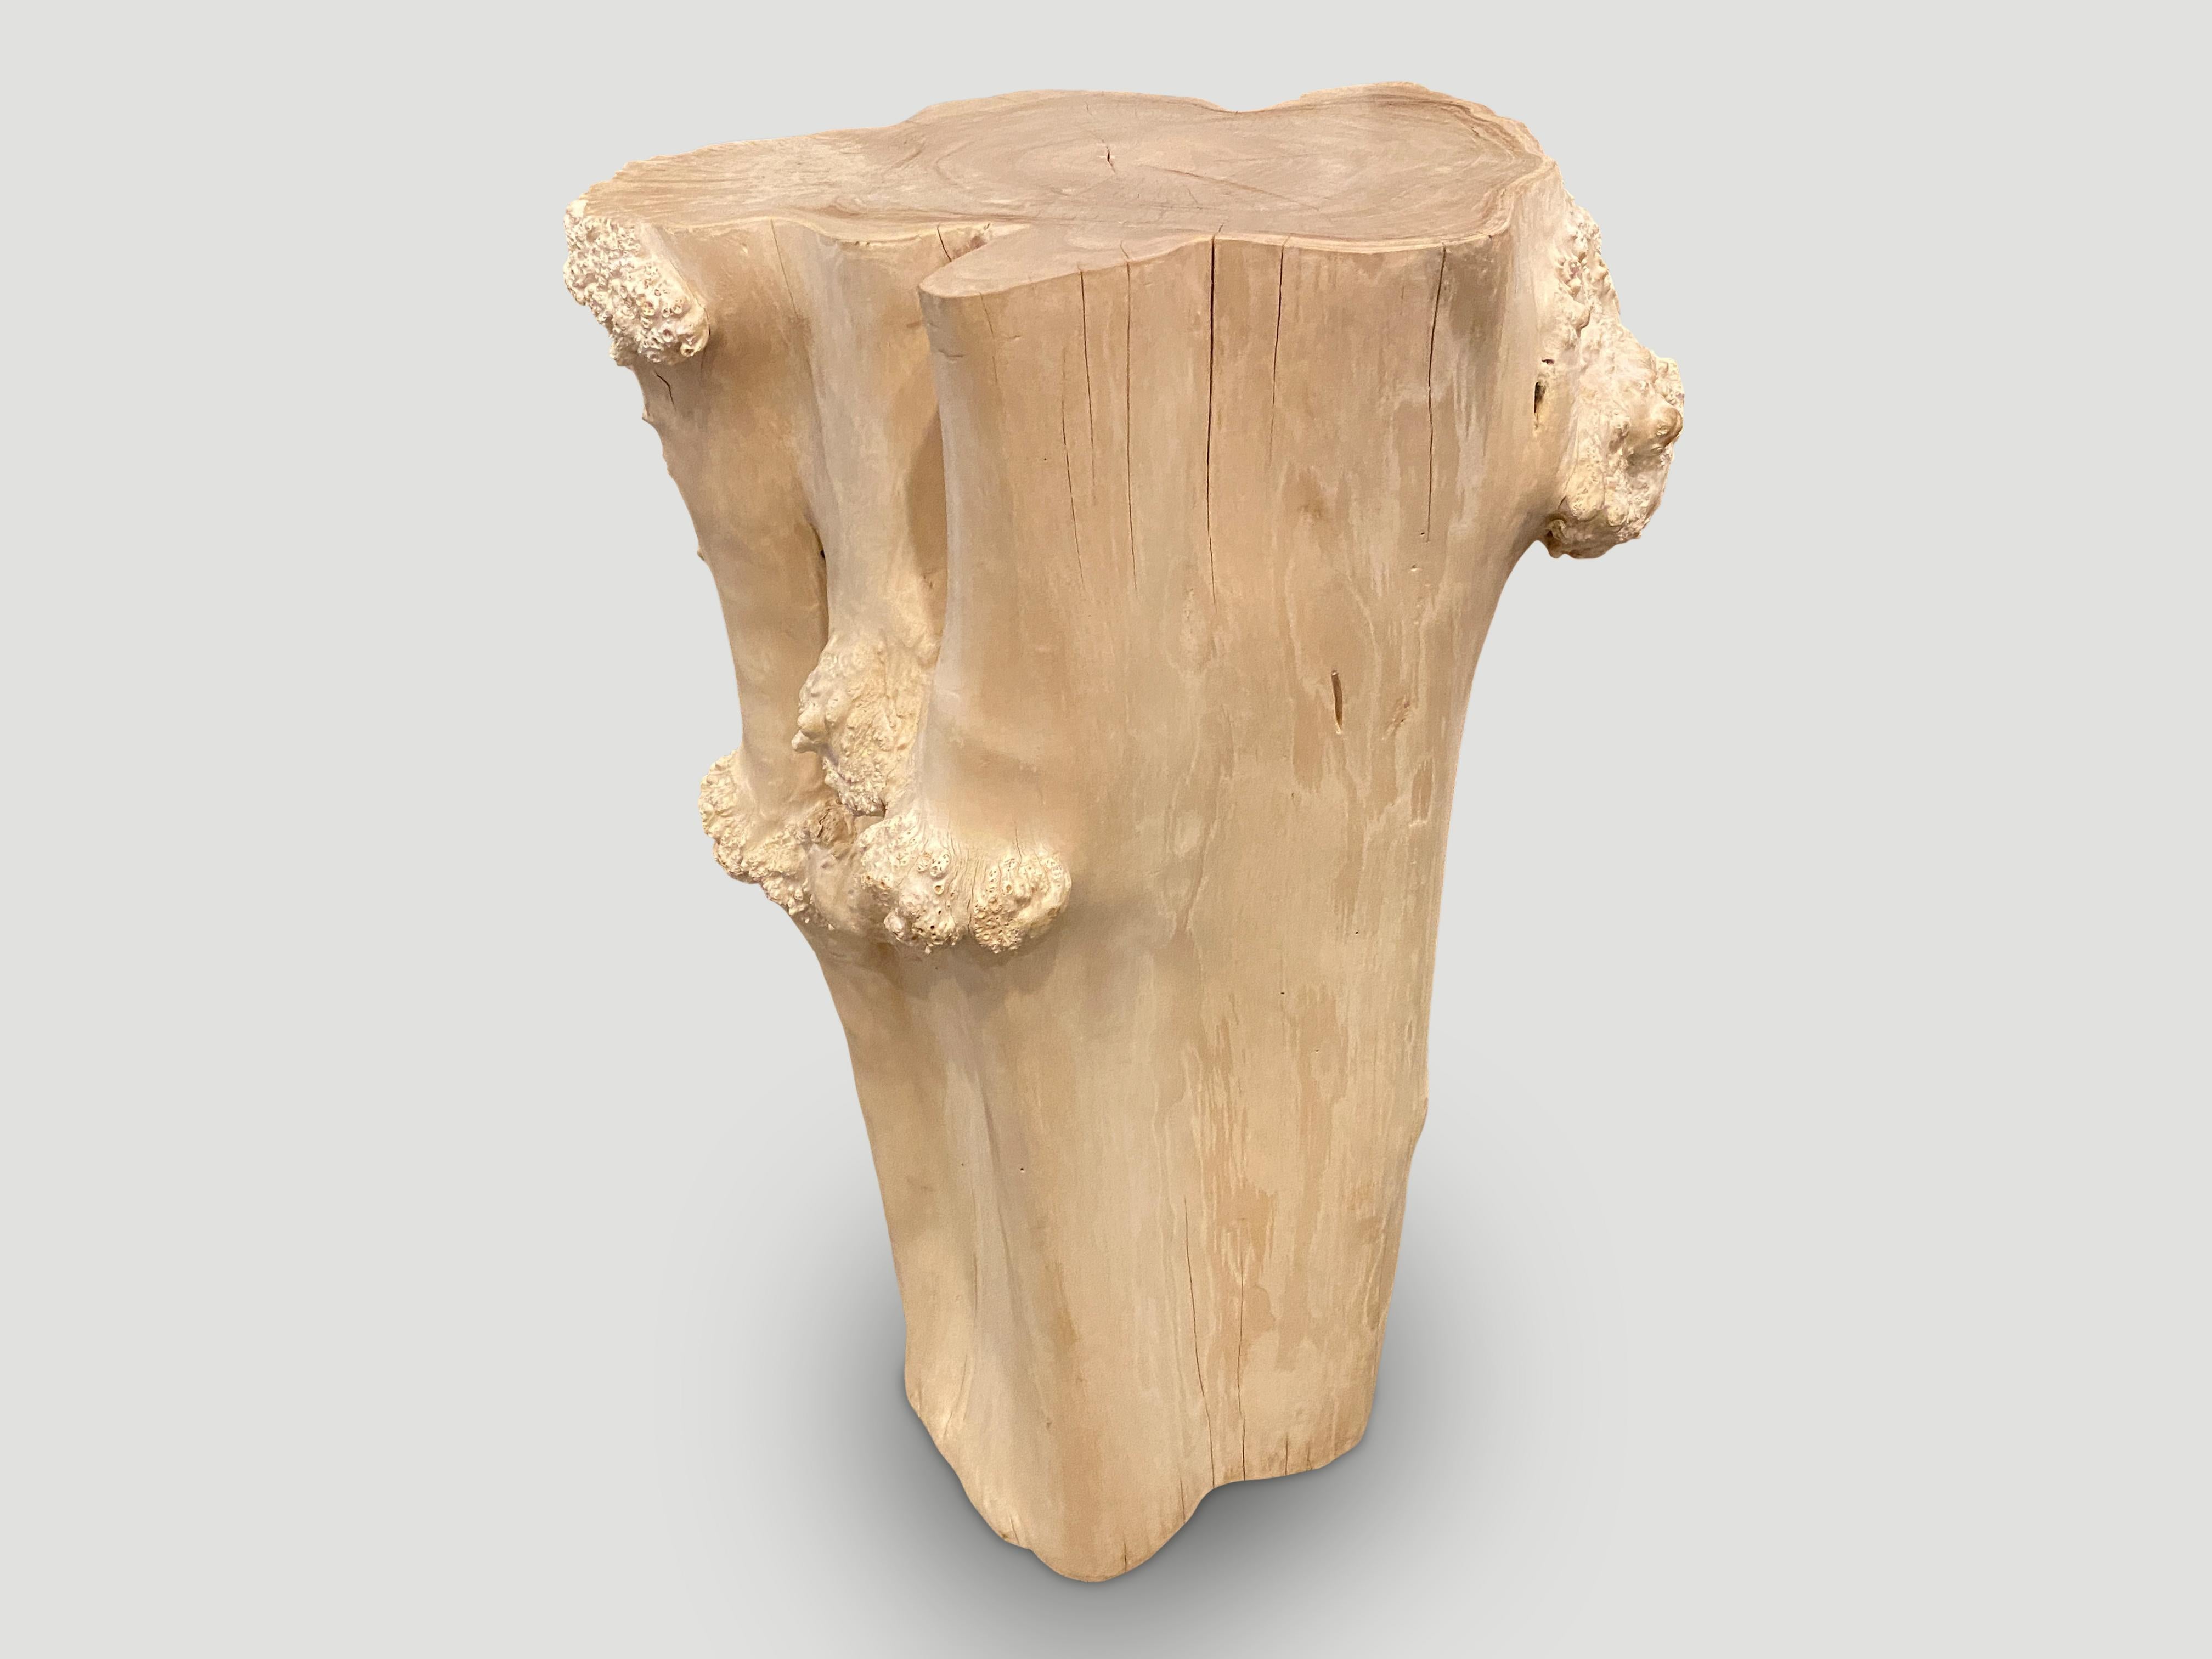 Andrianna Shamaris Rare Bleached Teak Root Pedestal In Excellent Condition For Sale In New York, NY